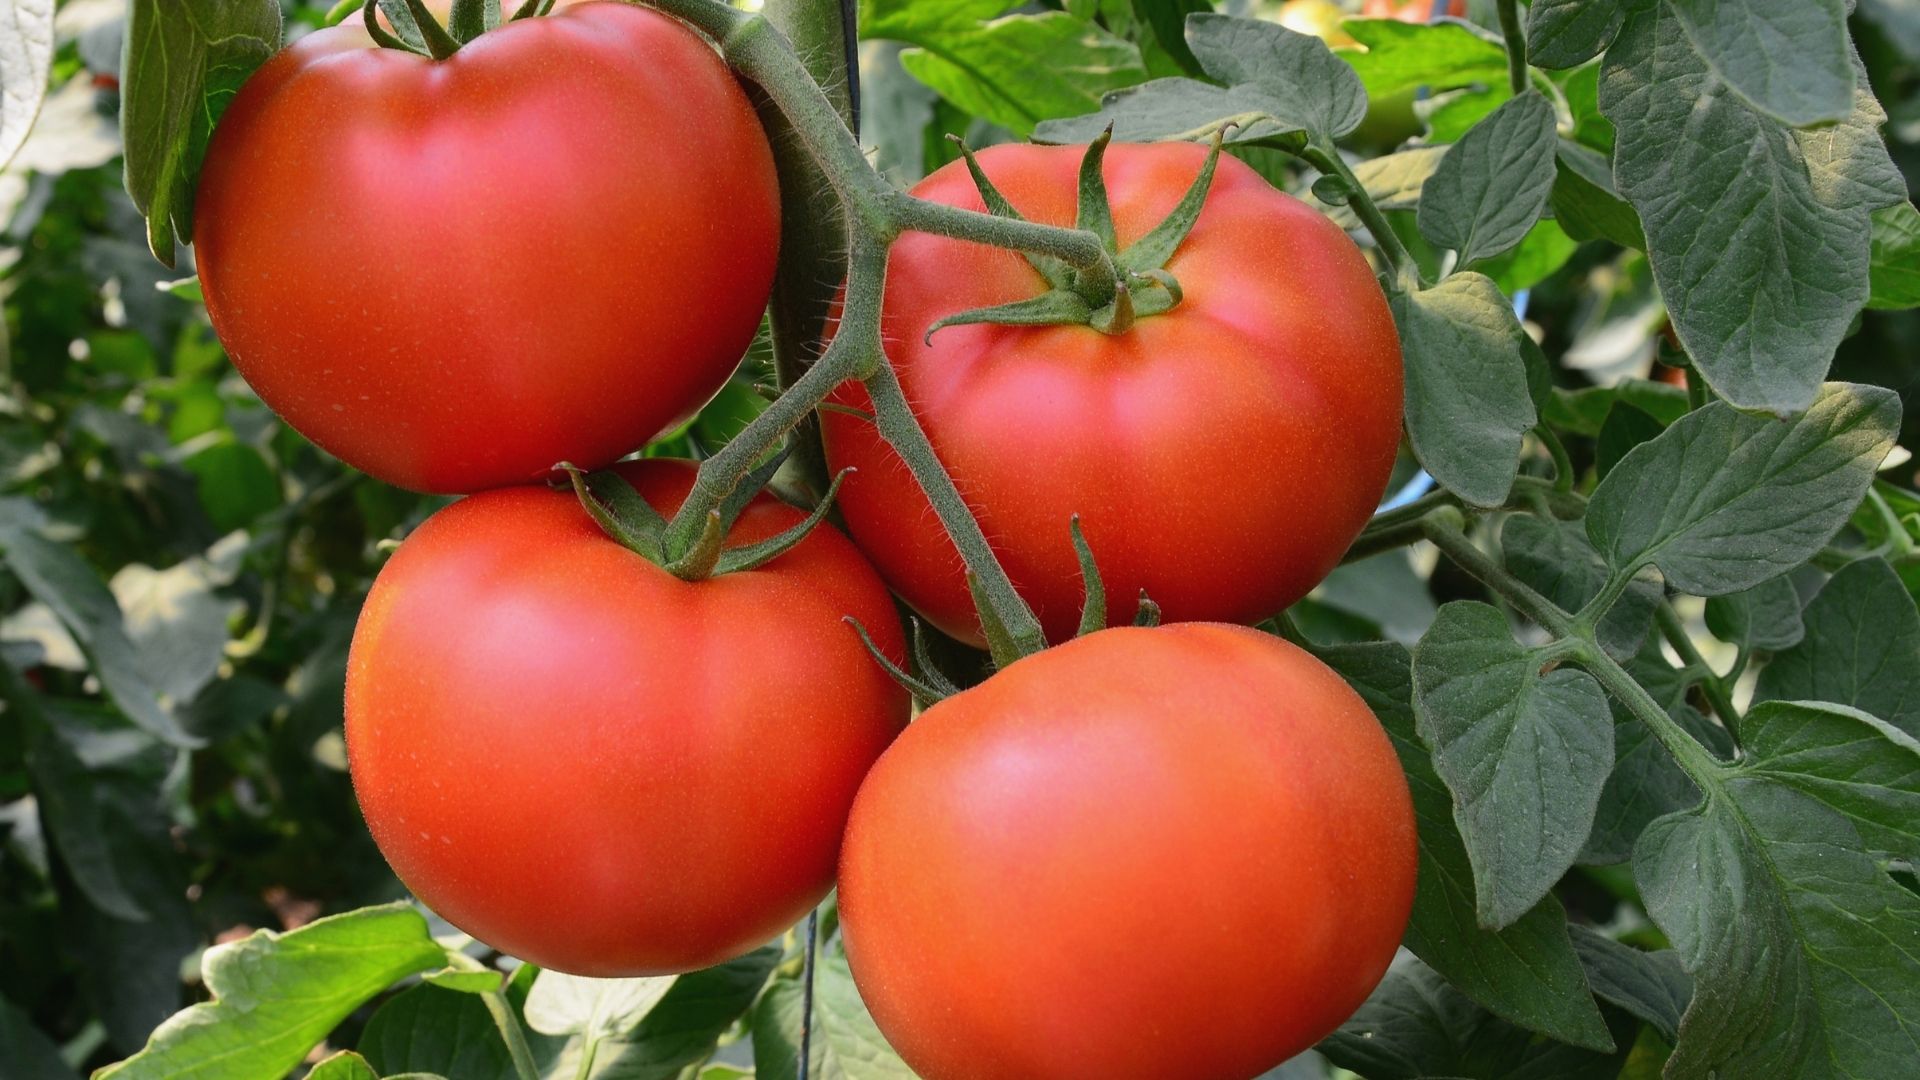 Overview of Tomato Pests